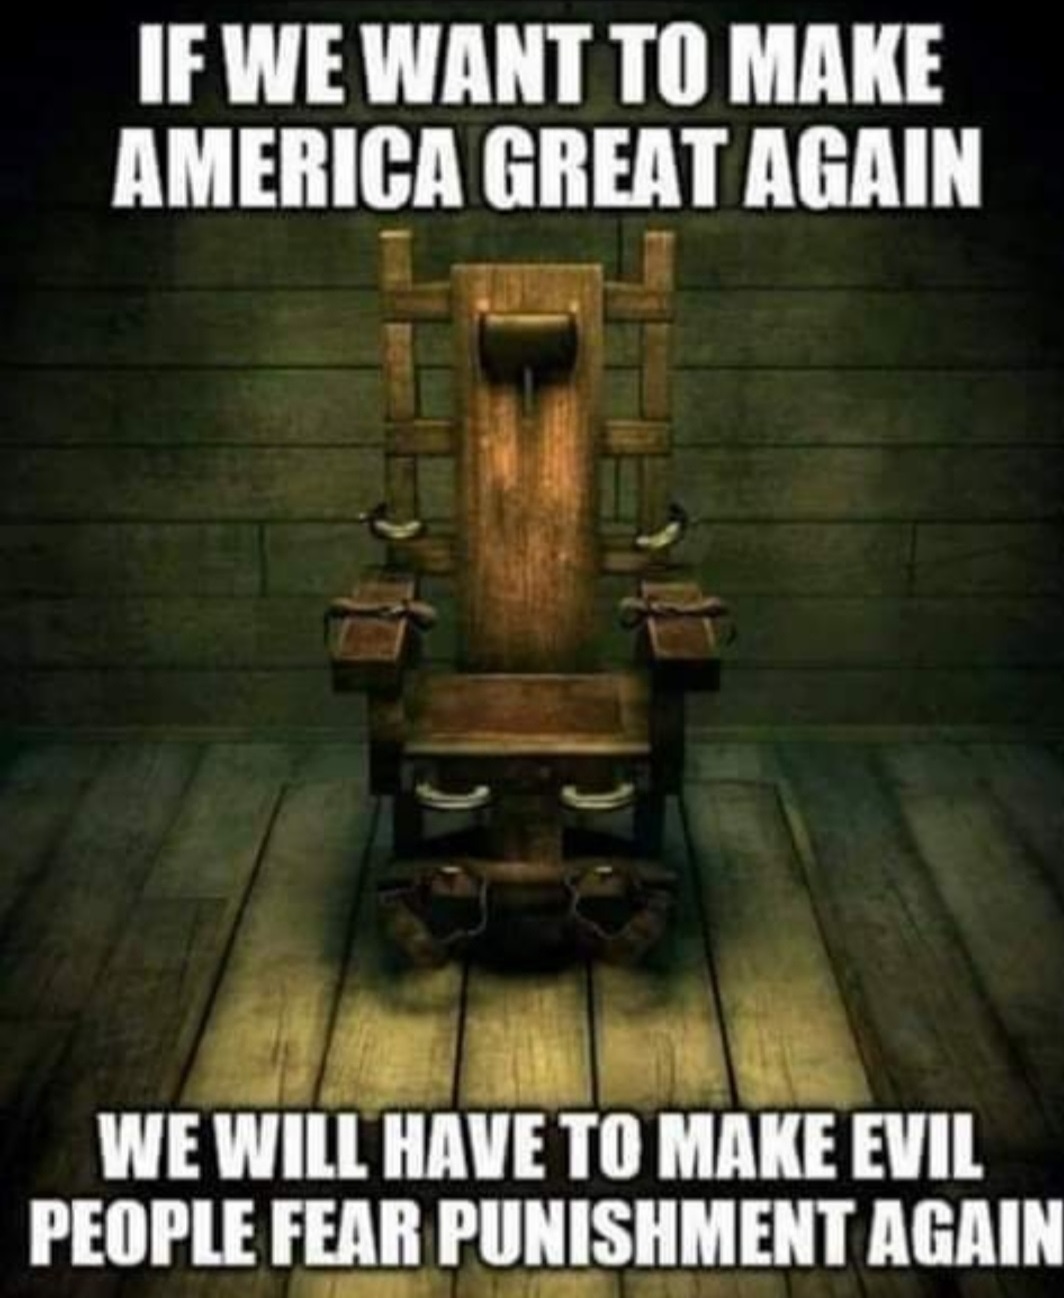 Electric chair - If We Want To Make America Great Again We Will Have To Make Evil People Fear Punishment Again